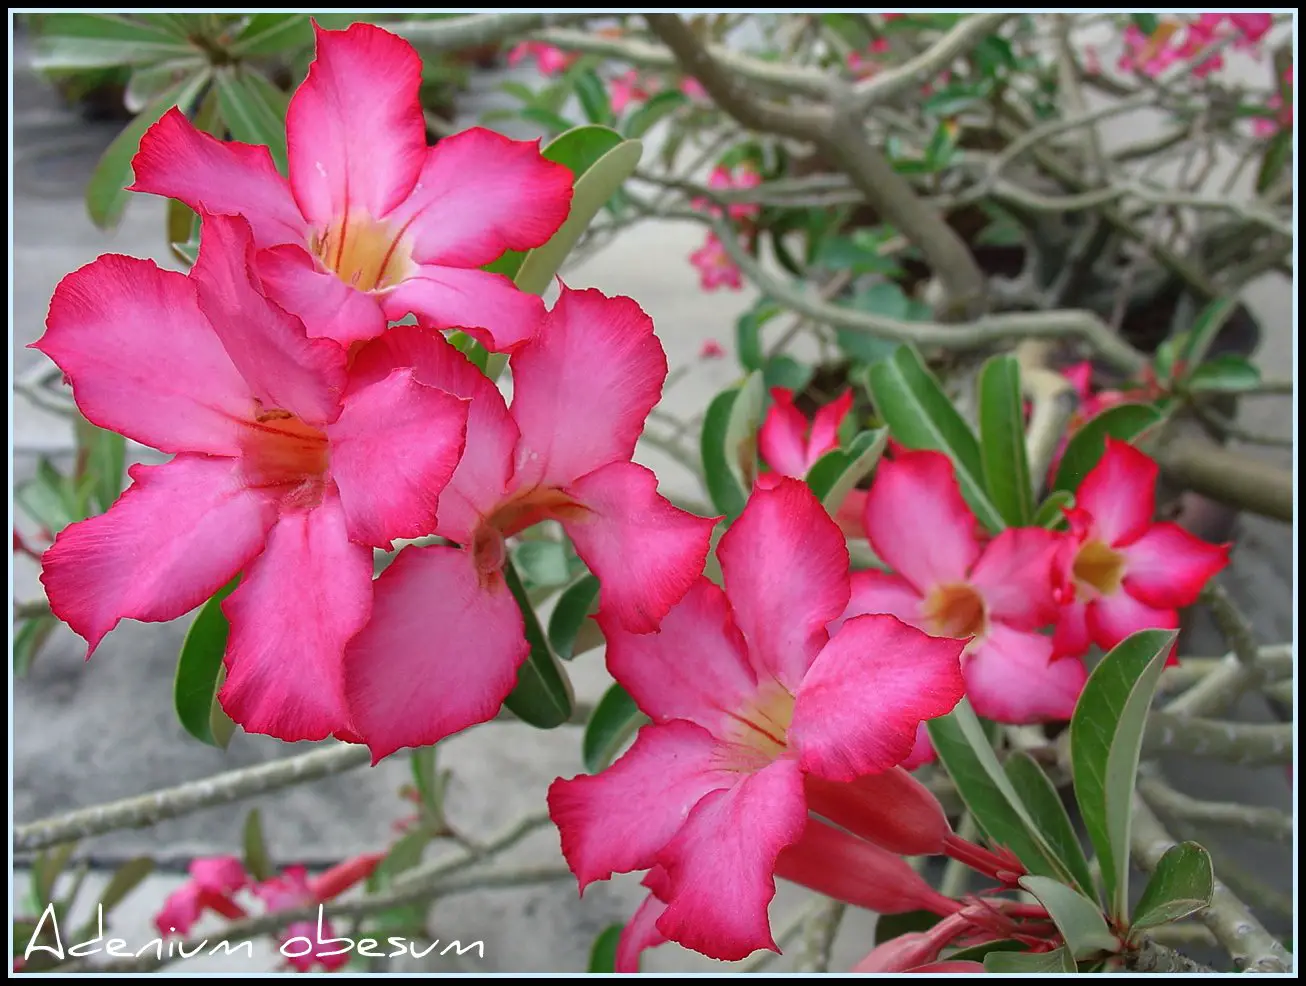 How to care for the desert rose